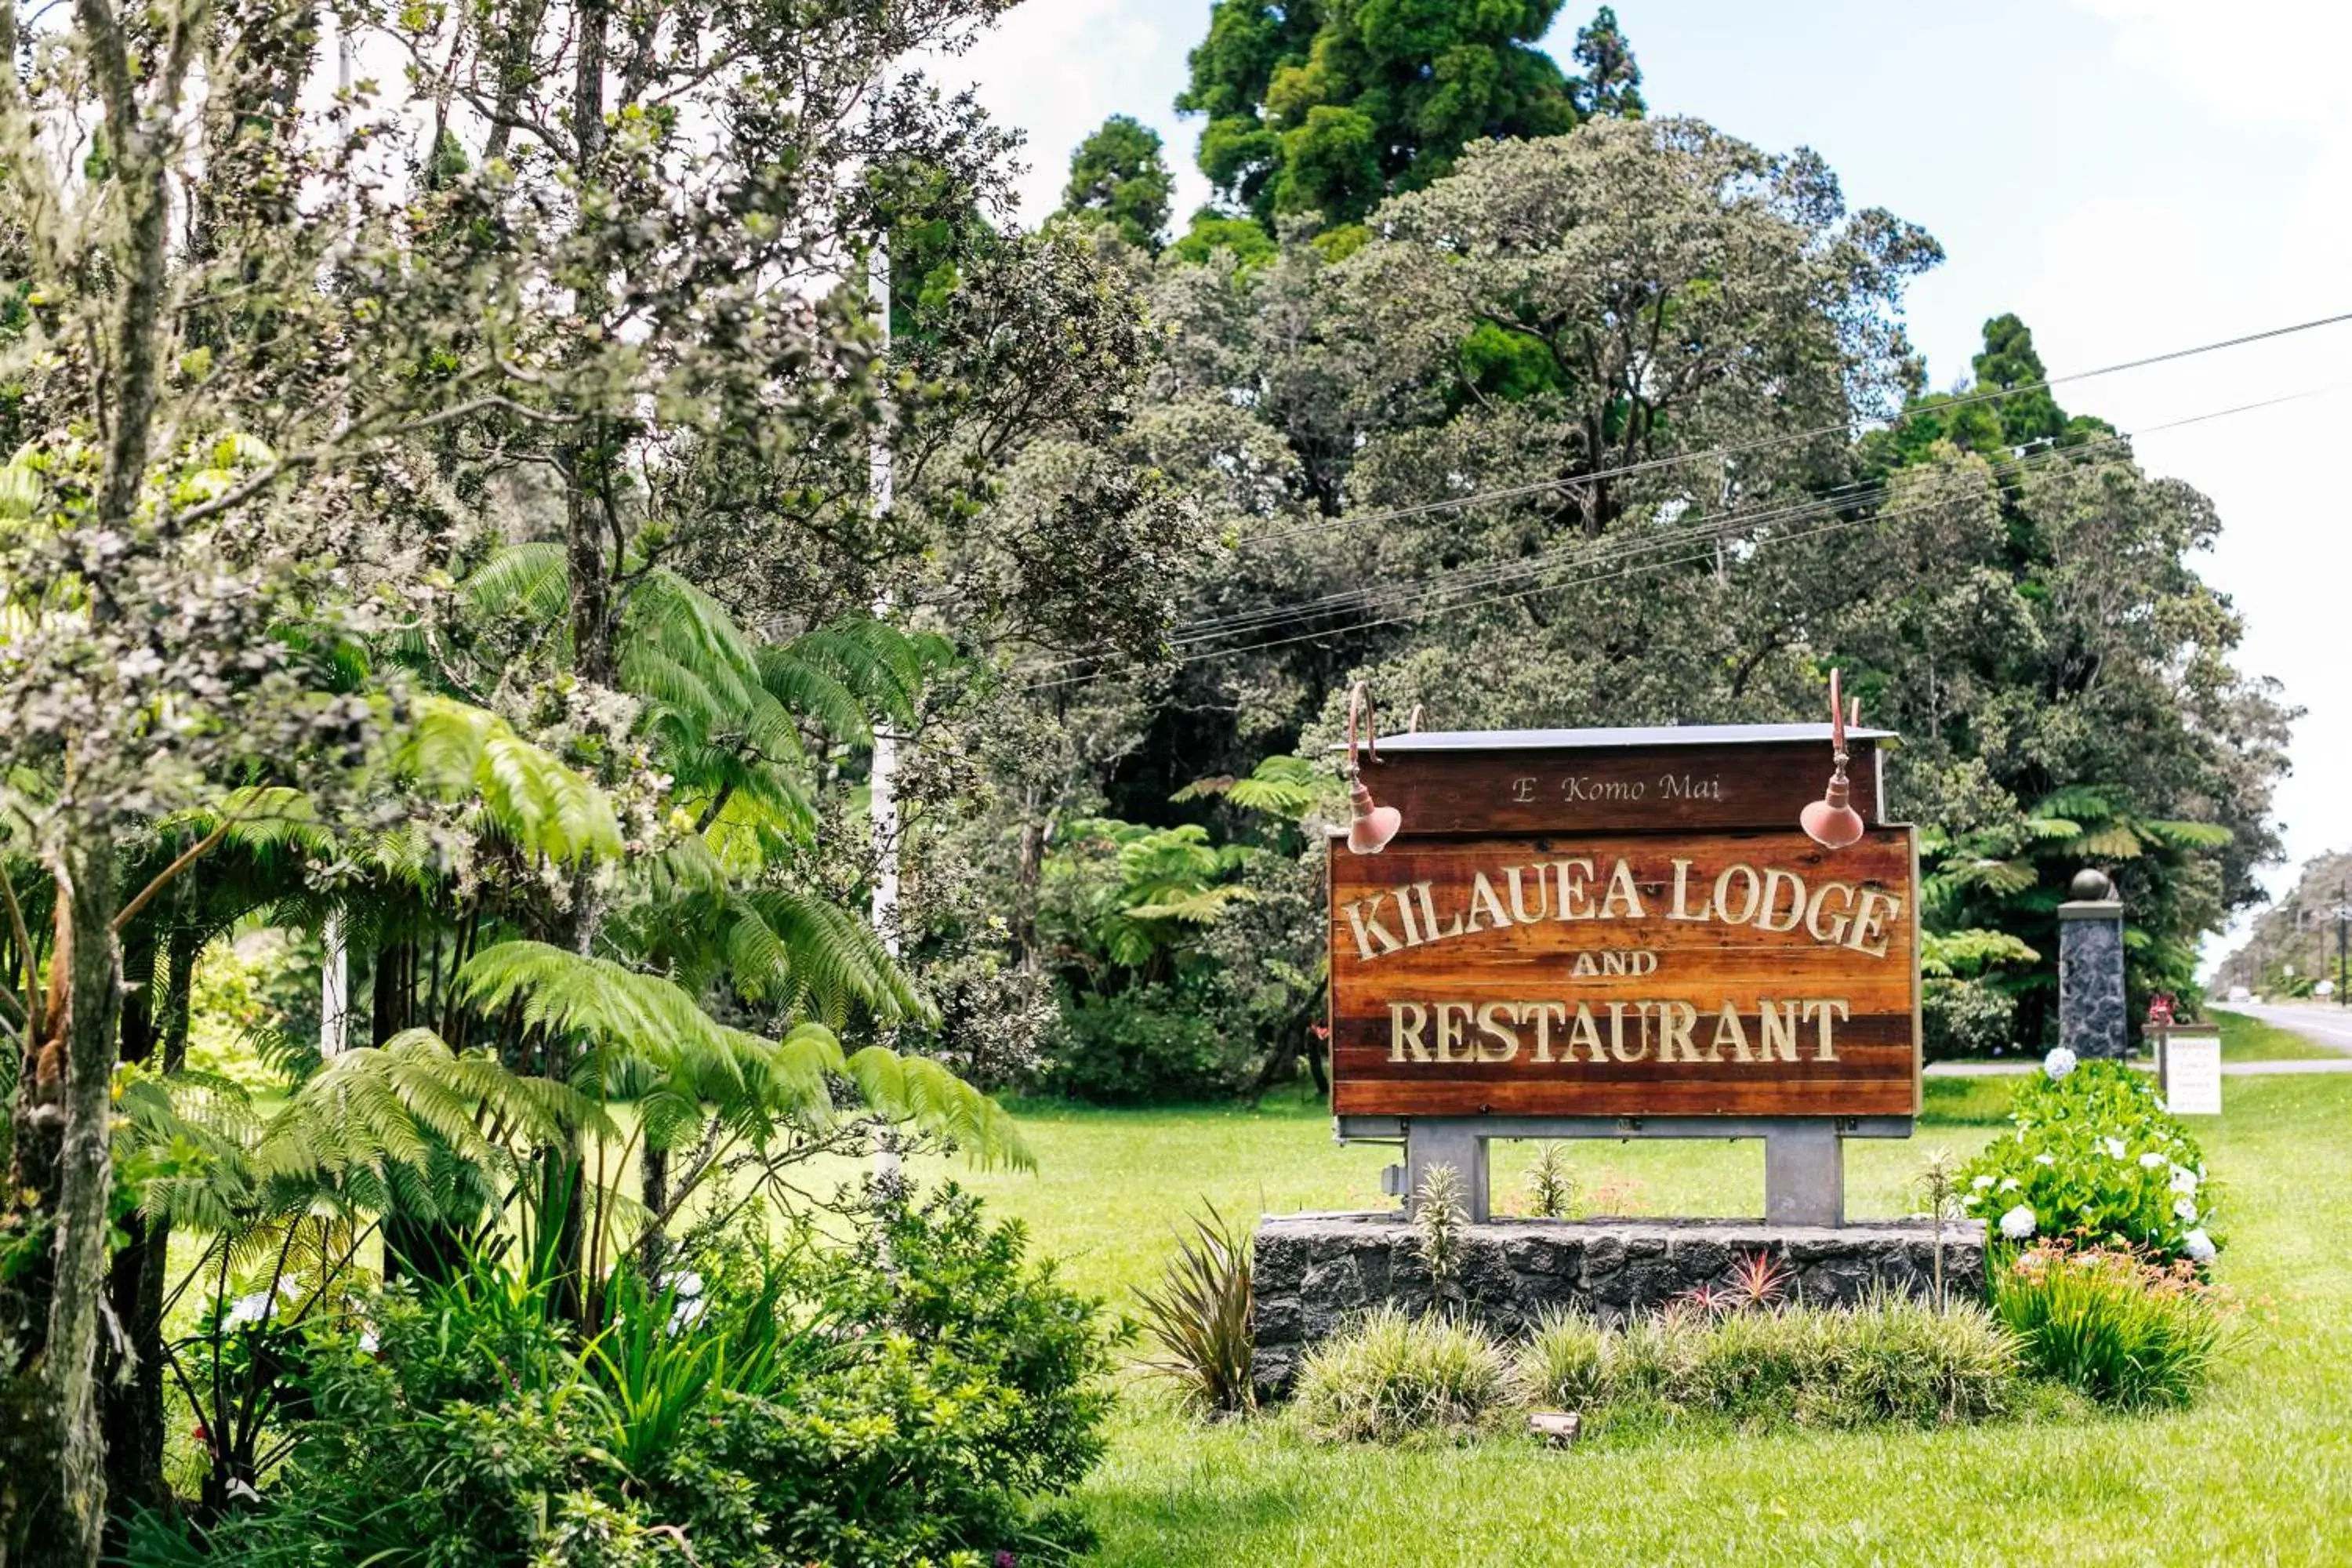 Property logo or sign in Kilauea Lodge and Restaurant